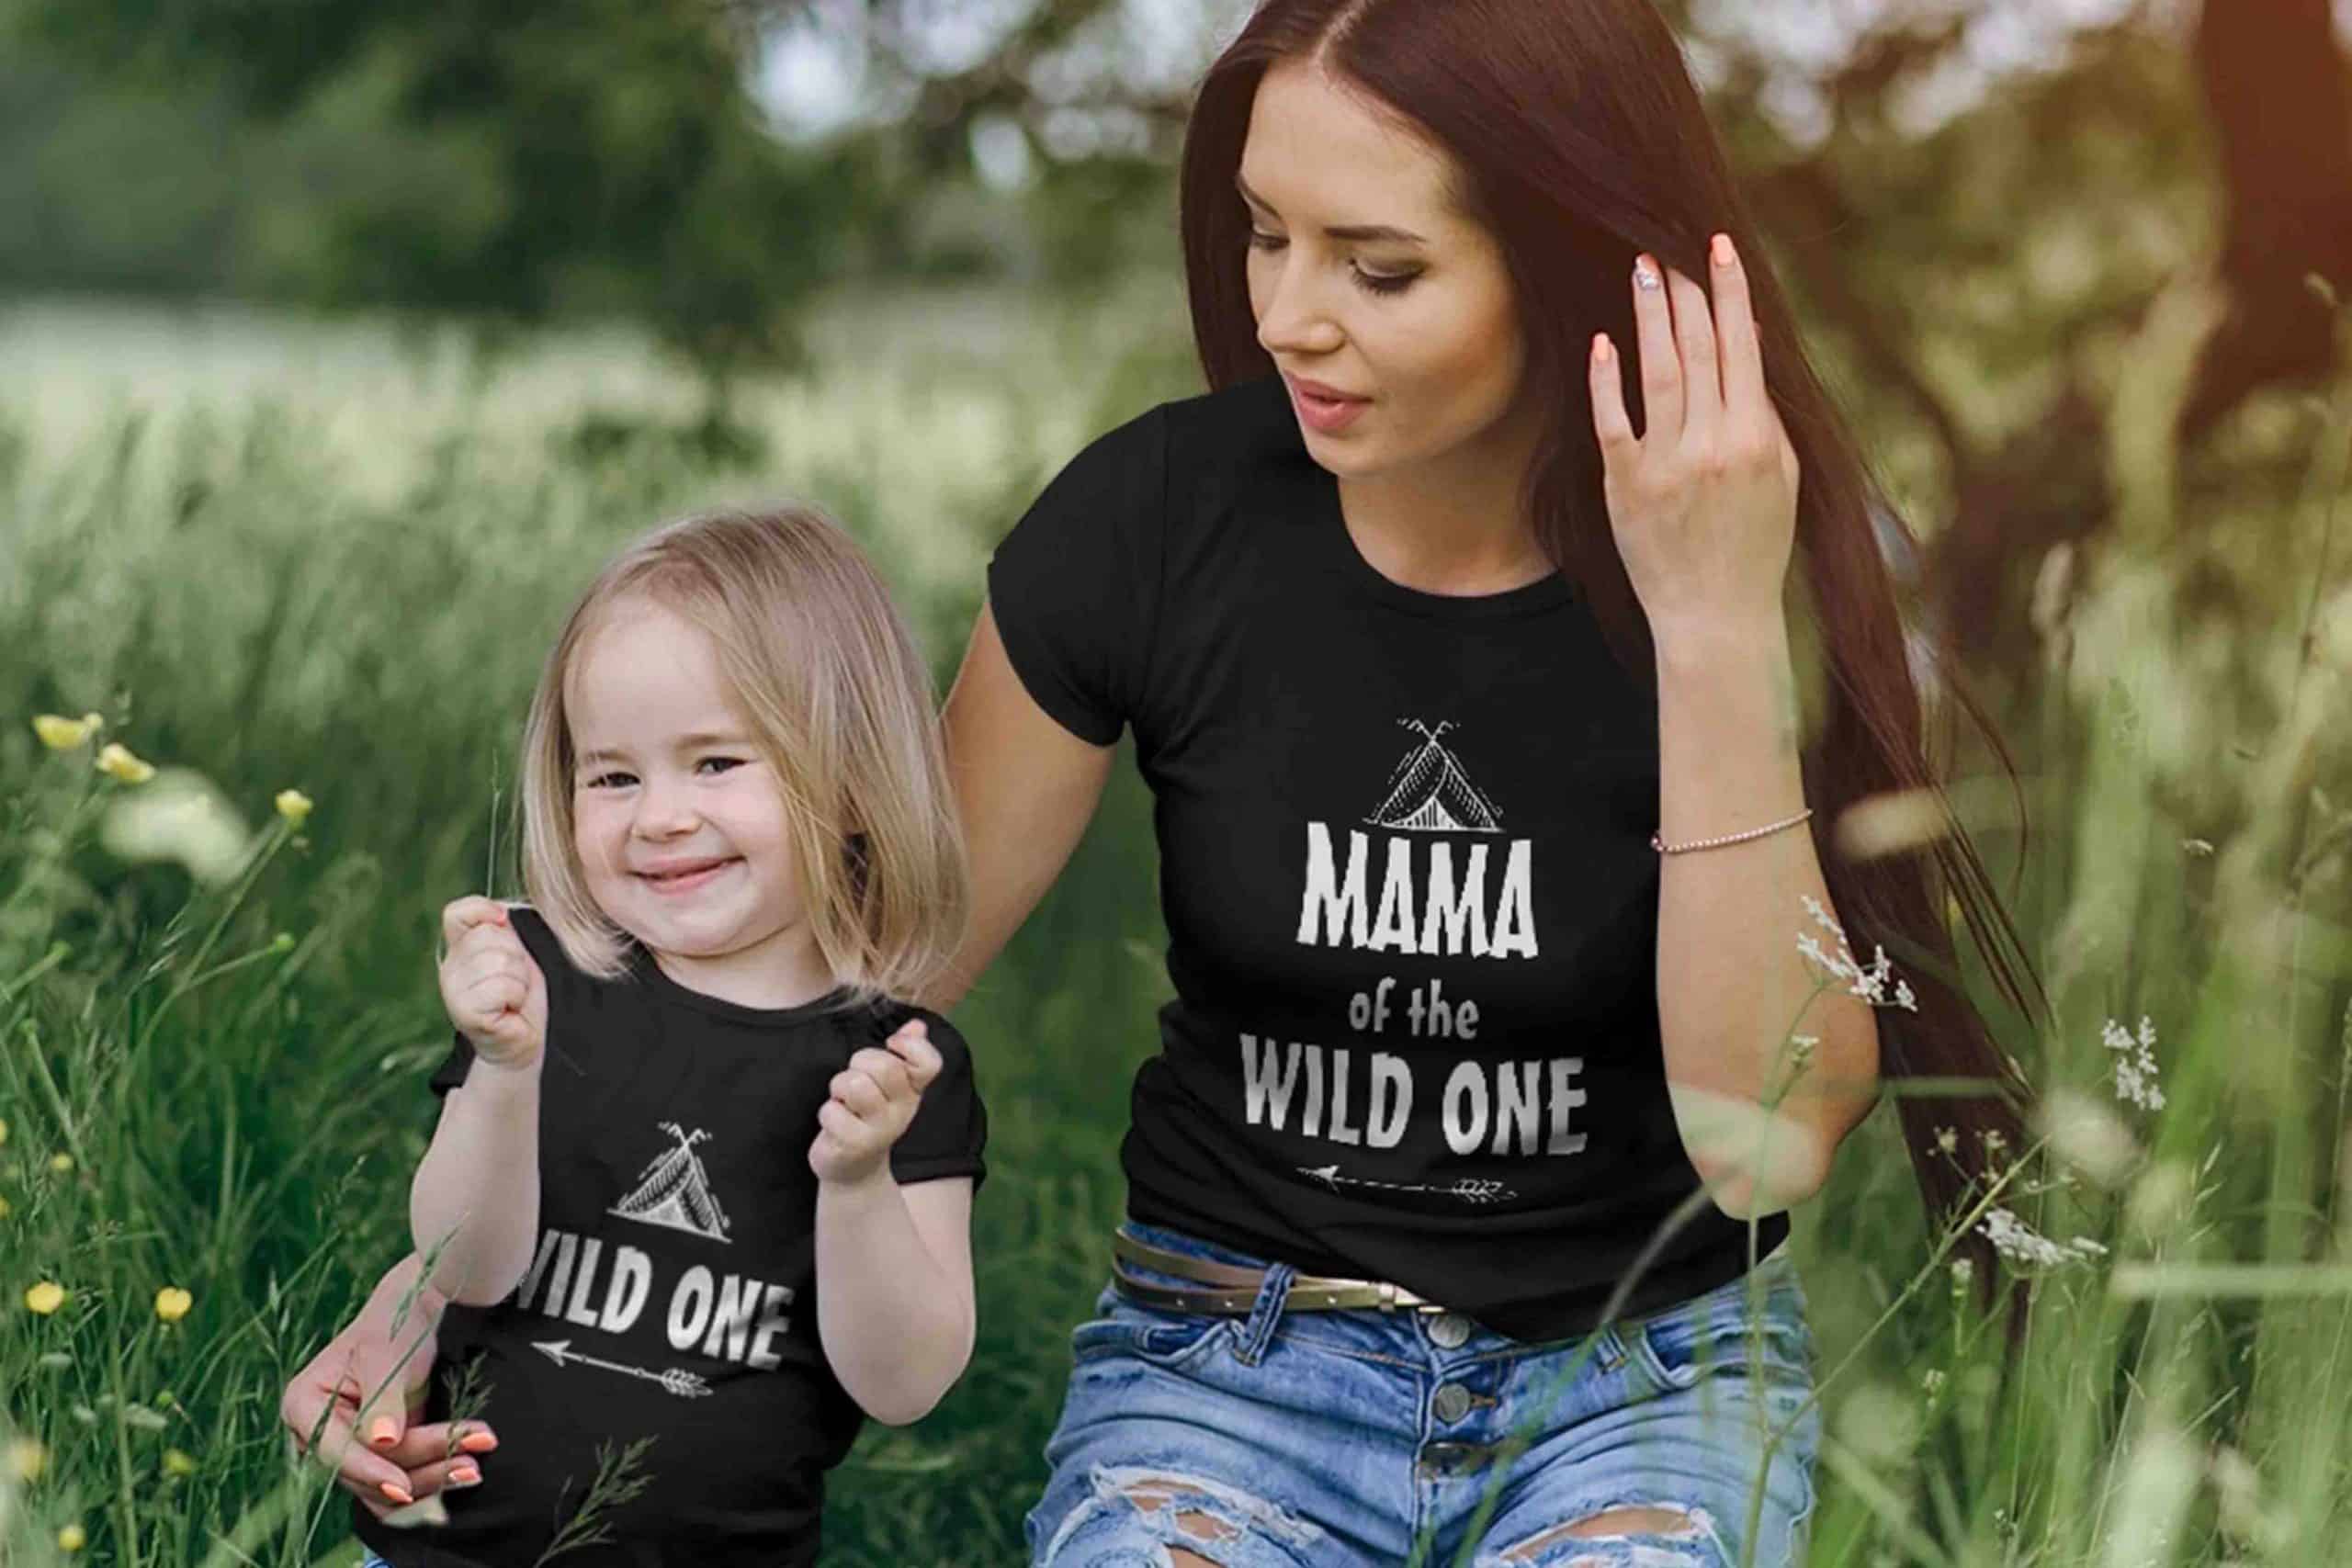 9 Best Mommy and Me Outfit Sets That Make the Ultimate Mother's Day Gift